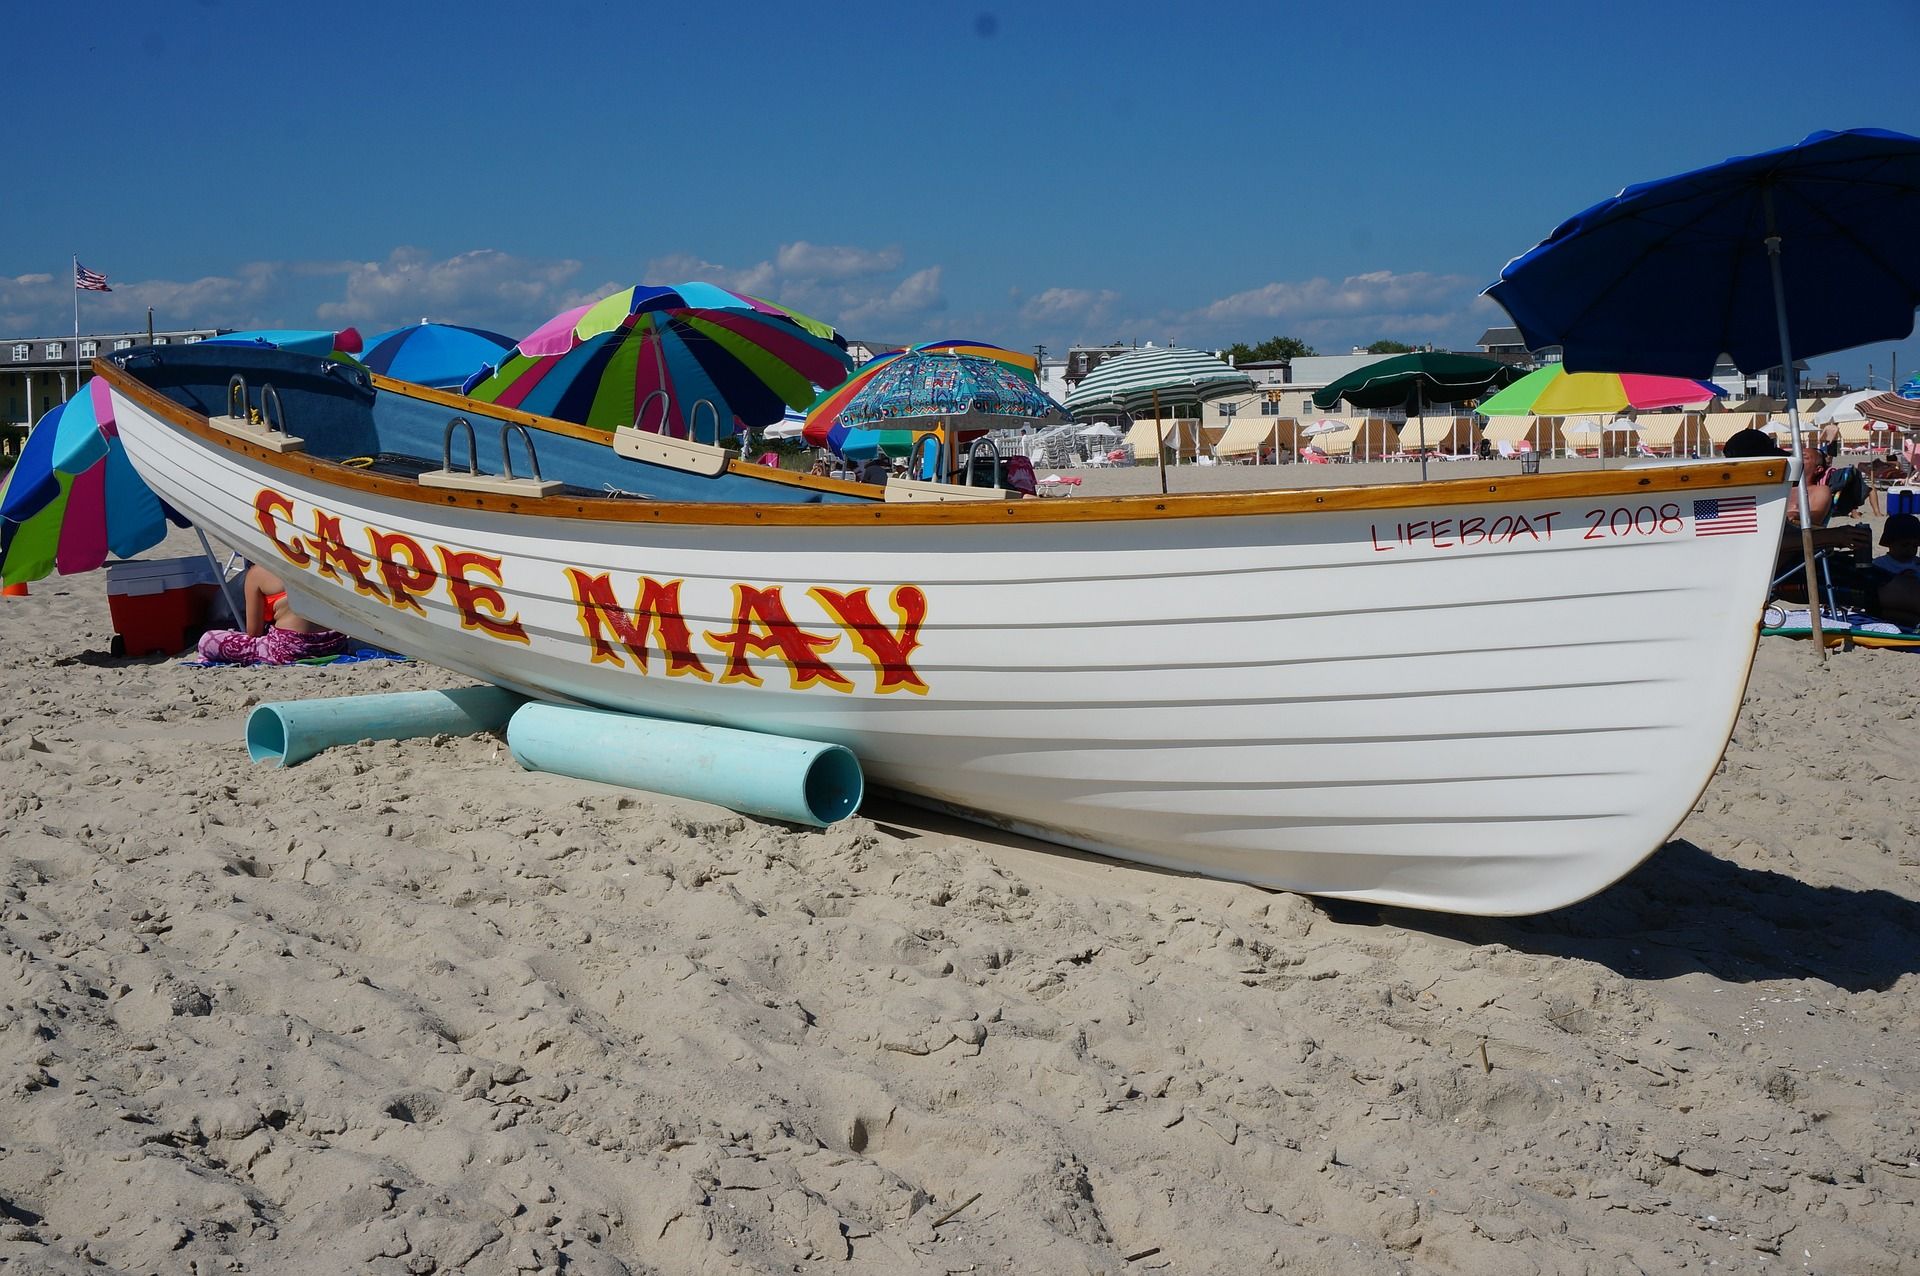 Boat on a beach in Cape May